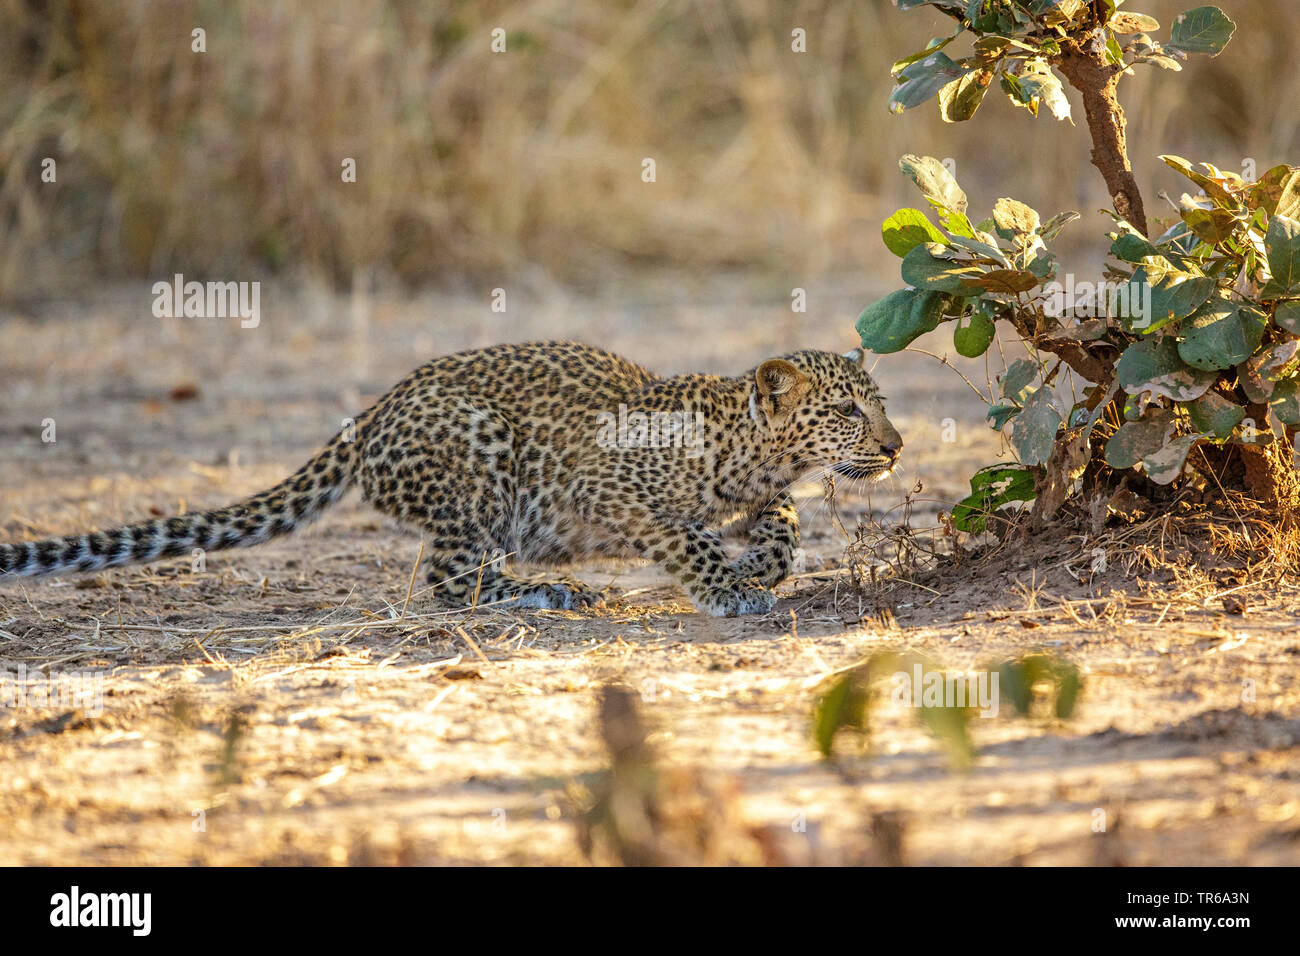 leopard (Panthera pardus), young leopard sneaking up, Zambia, South Luangwa National Park Stock Photo